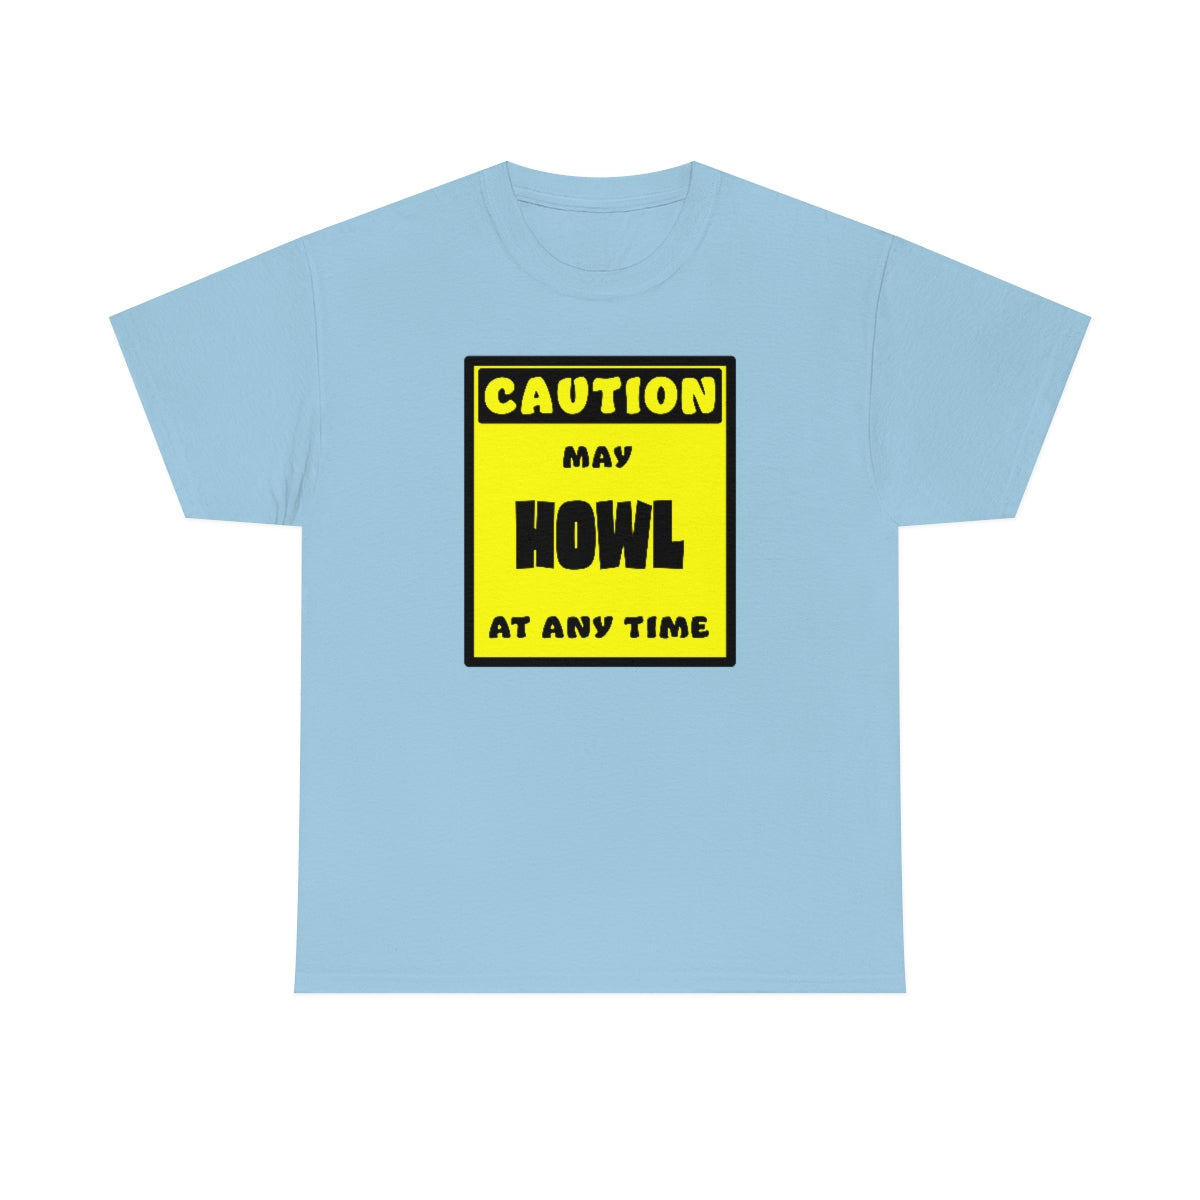 CAUTION! May HOWL at any time! - T-Shirt T-Shirt AFLT-Whootorca Light Blue S 